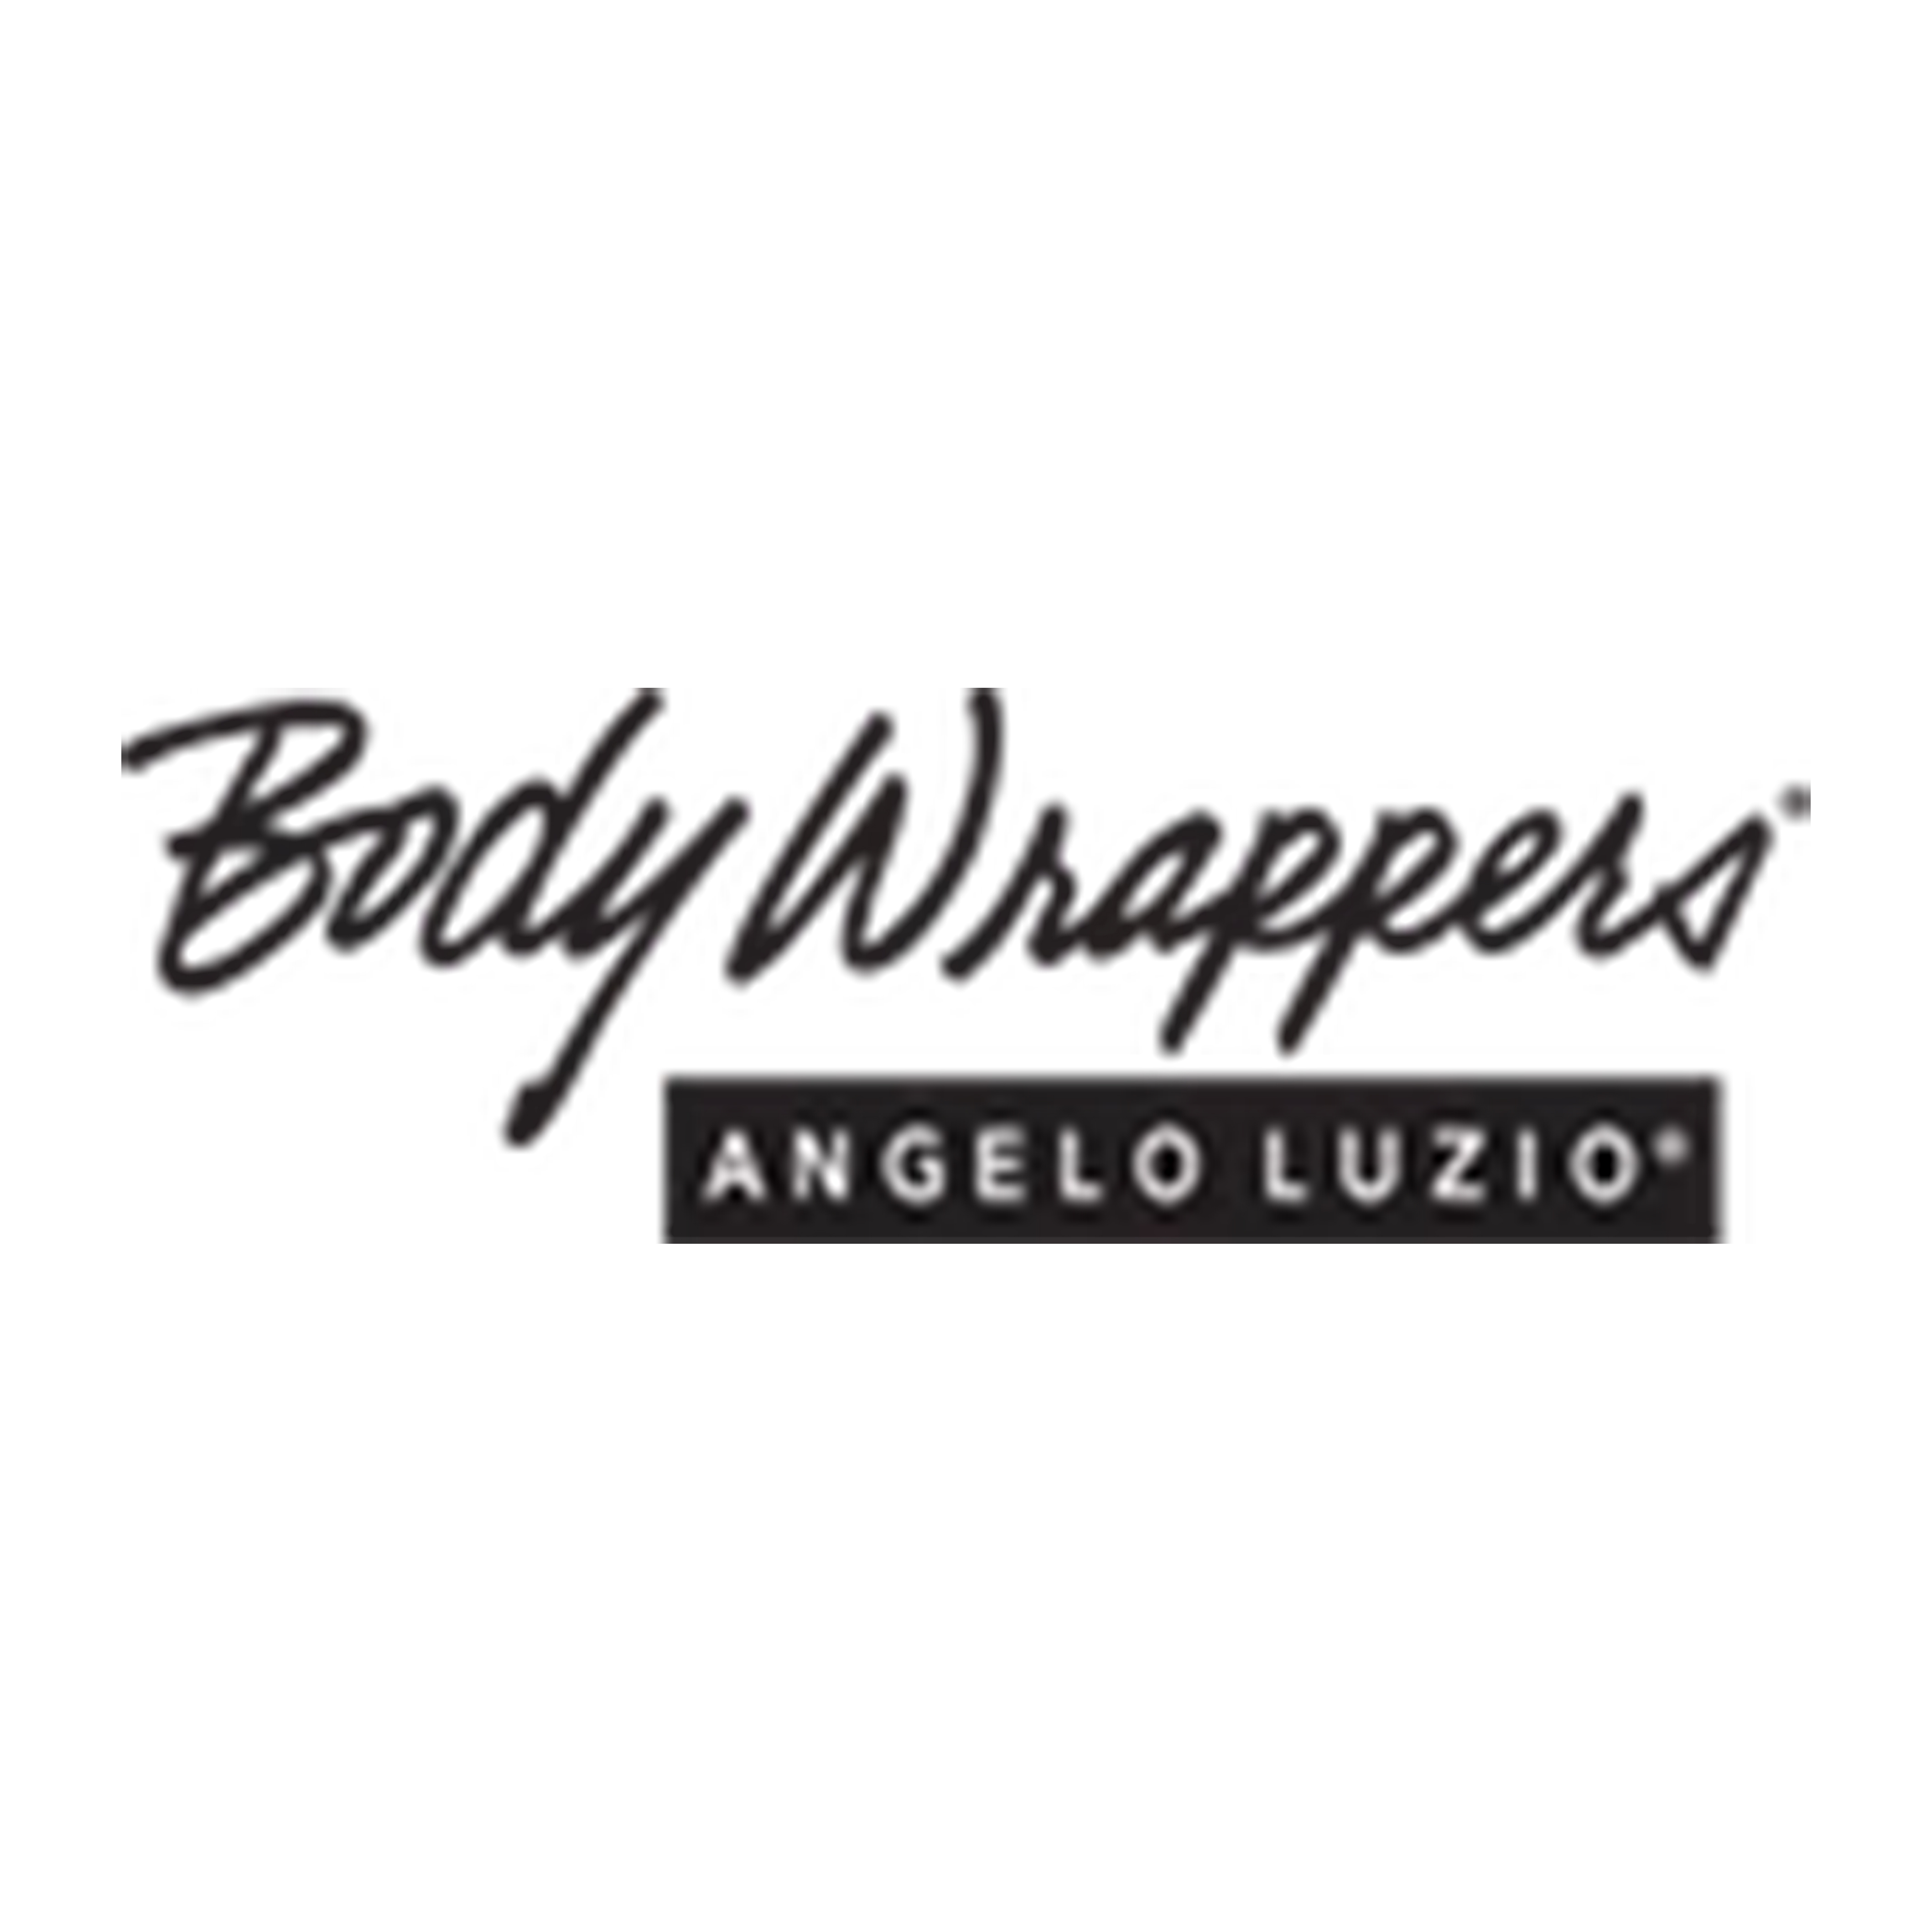 Body Wrappers coupon codes